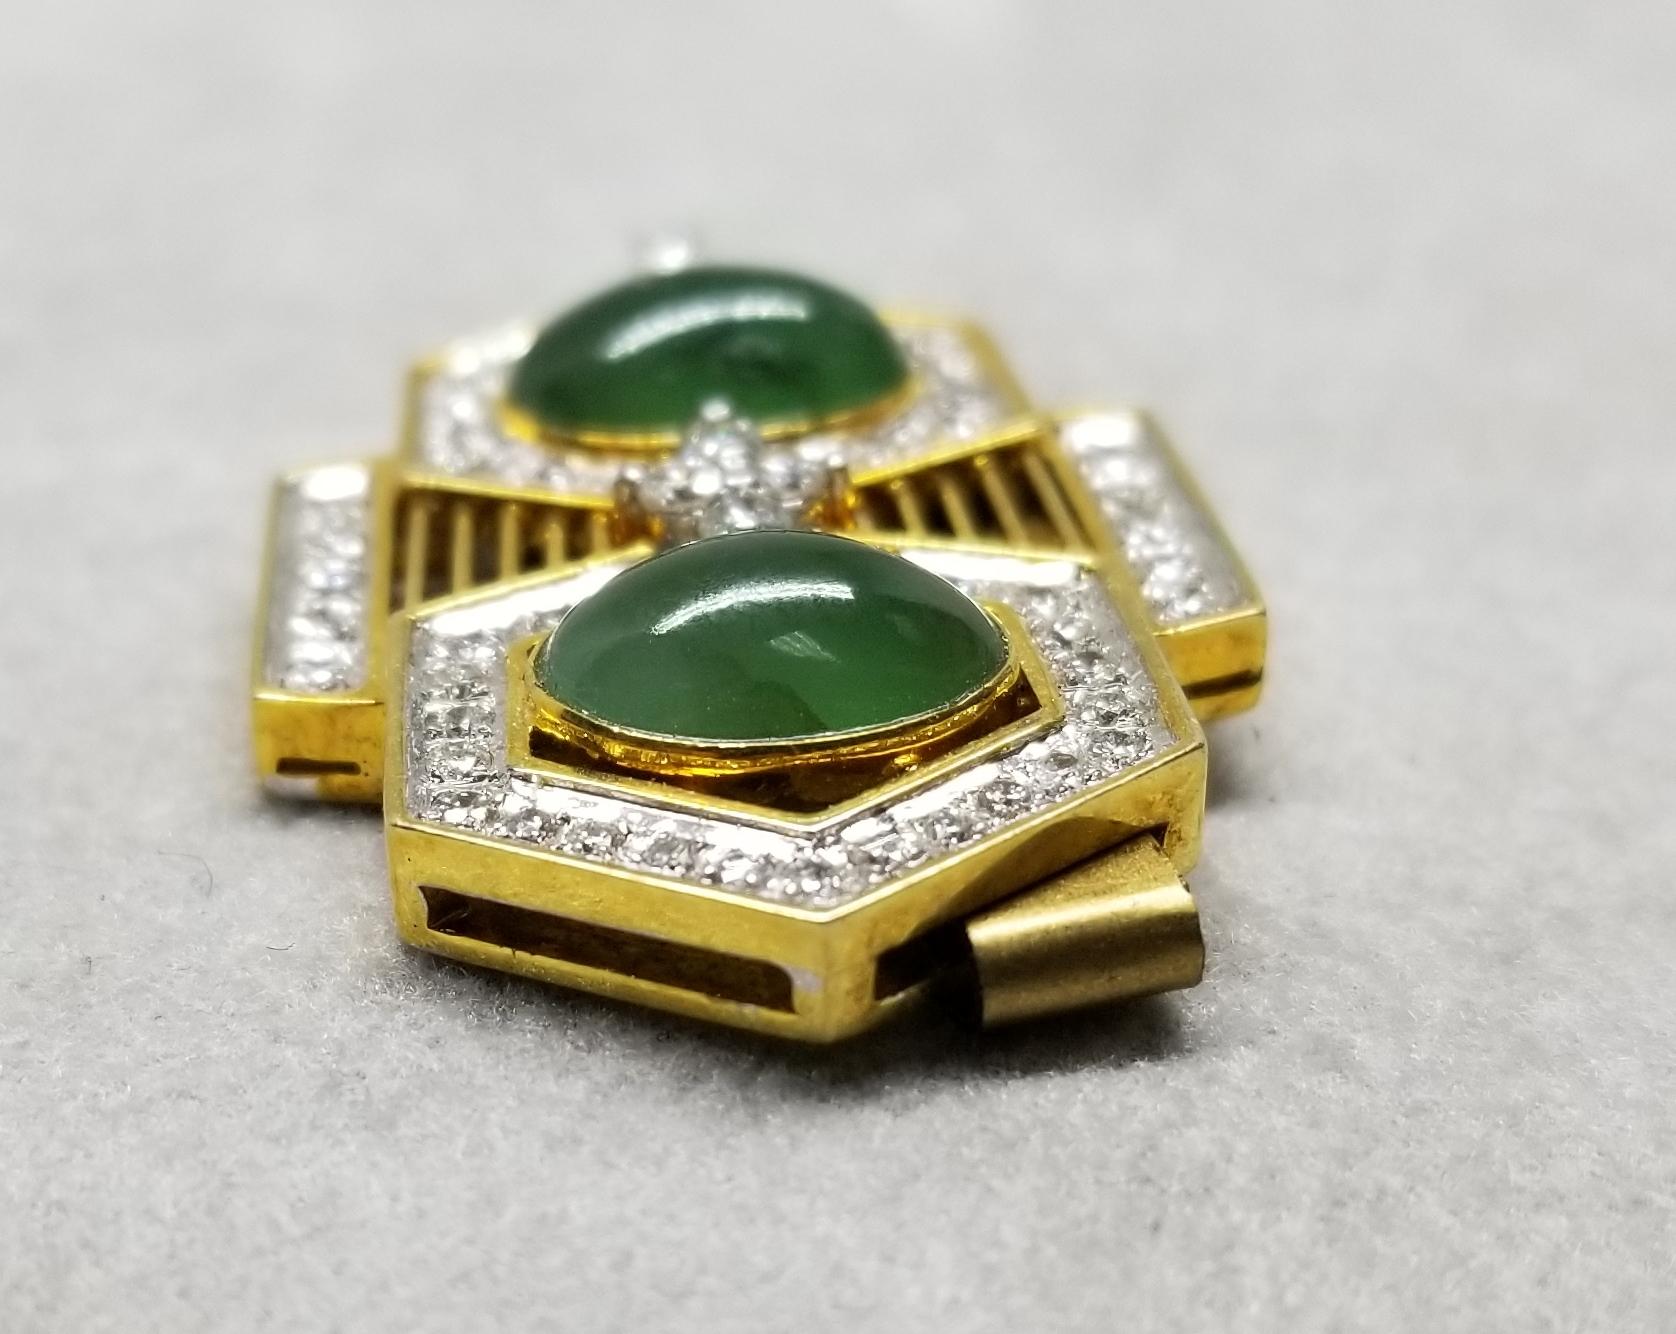 This piece of fine jewelry was designed and hand crafted by “Moshi” of New York, it was found in a vault from an estate sale and was never used.  14k yellow gold jade and diamond pendant, containing 2 oval cabochon jade and 53 round full cut